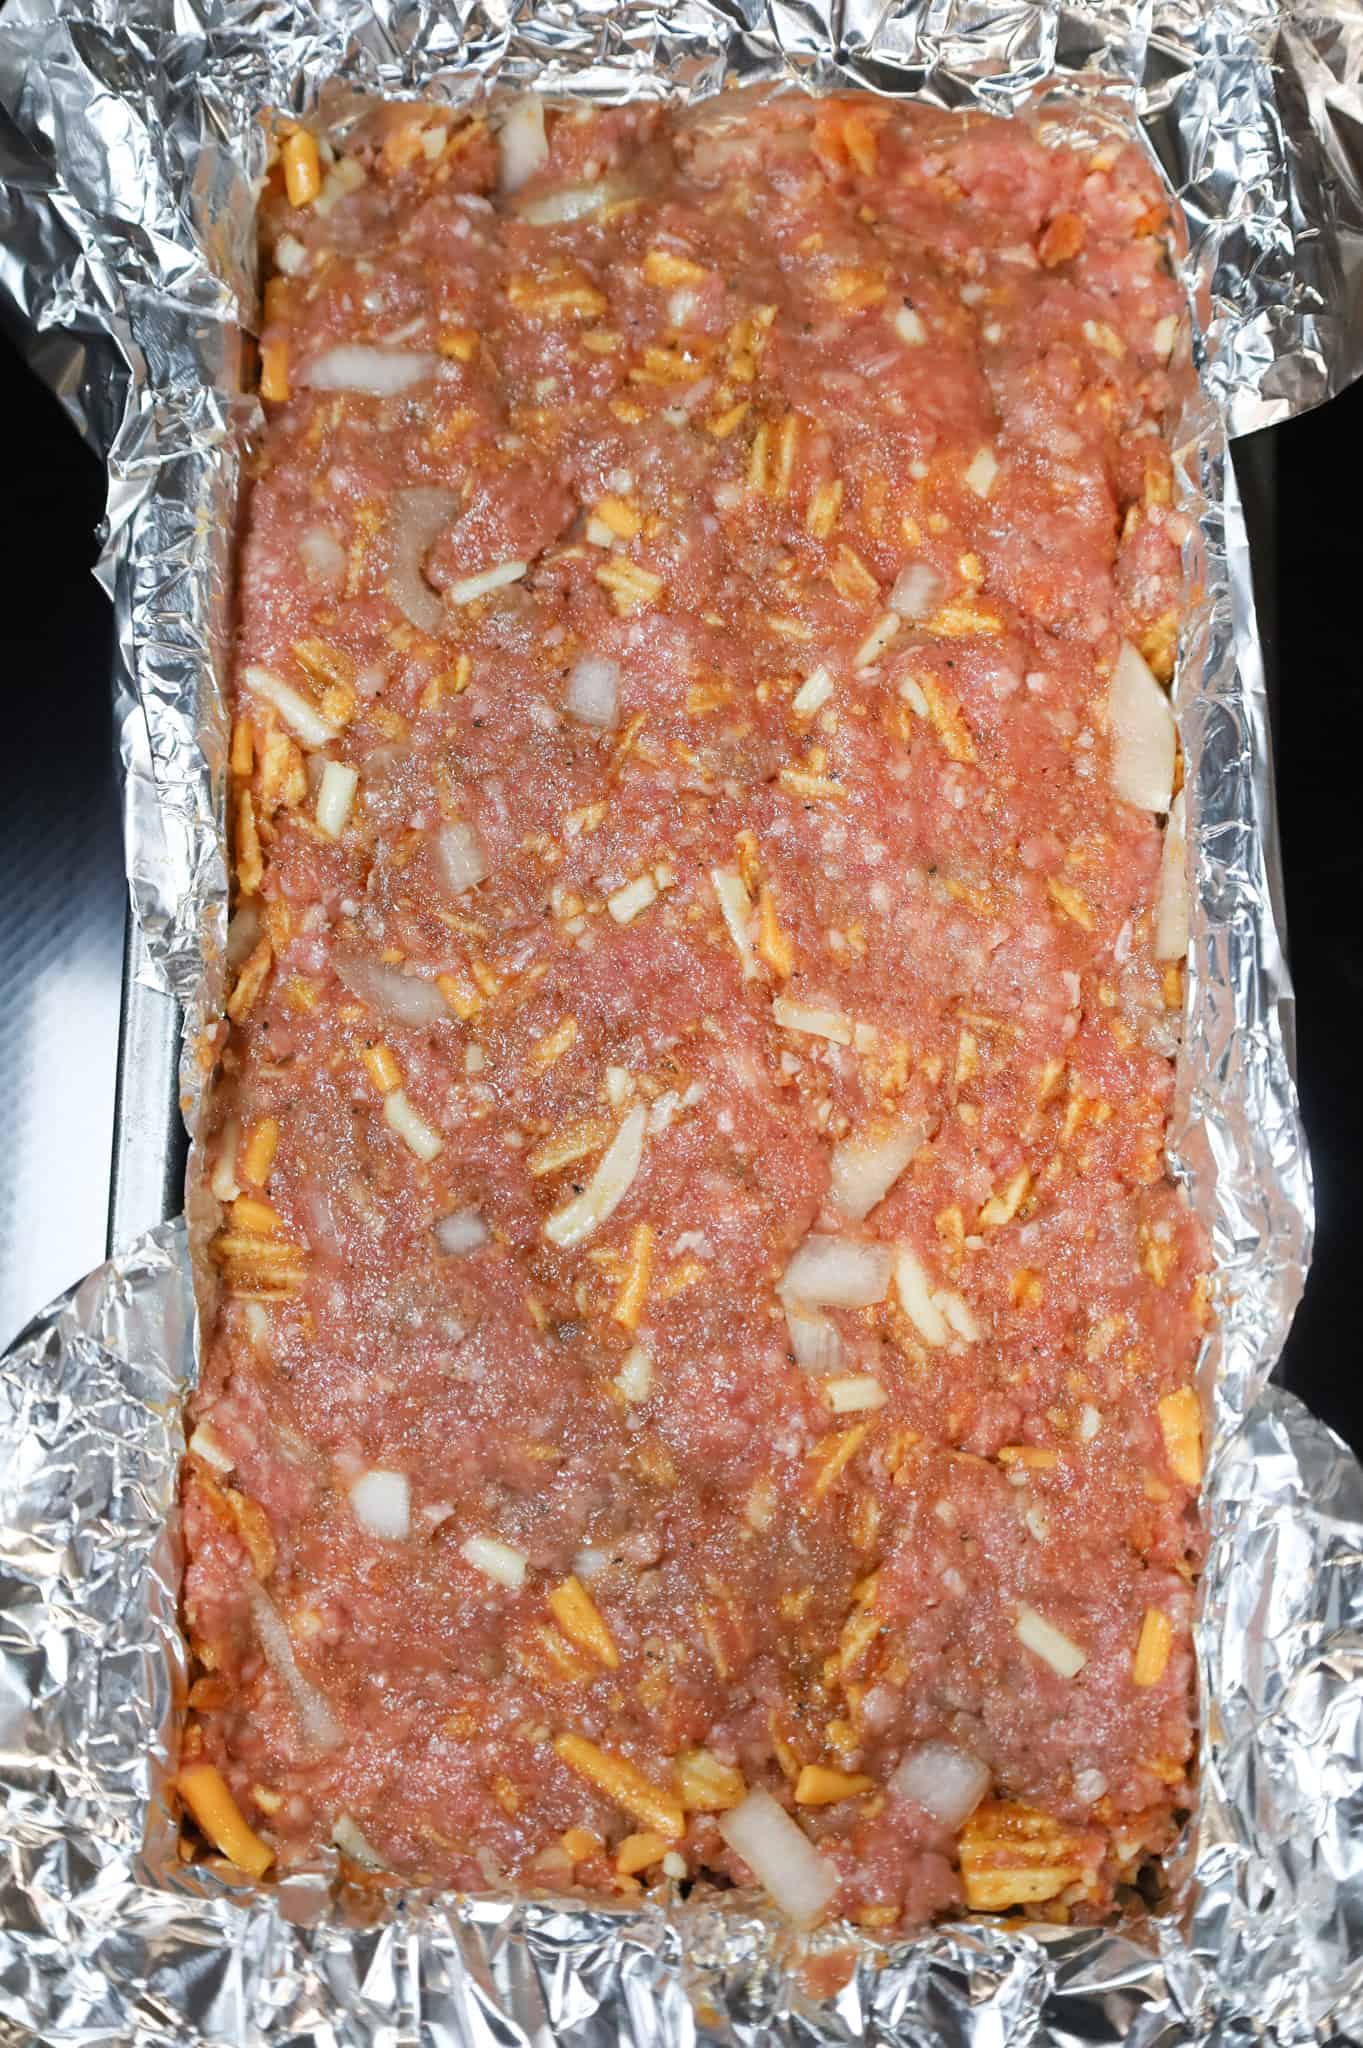 meatloaf mixture in a foil lined pan before baking